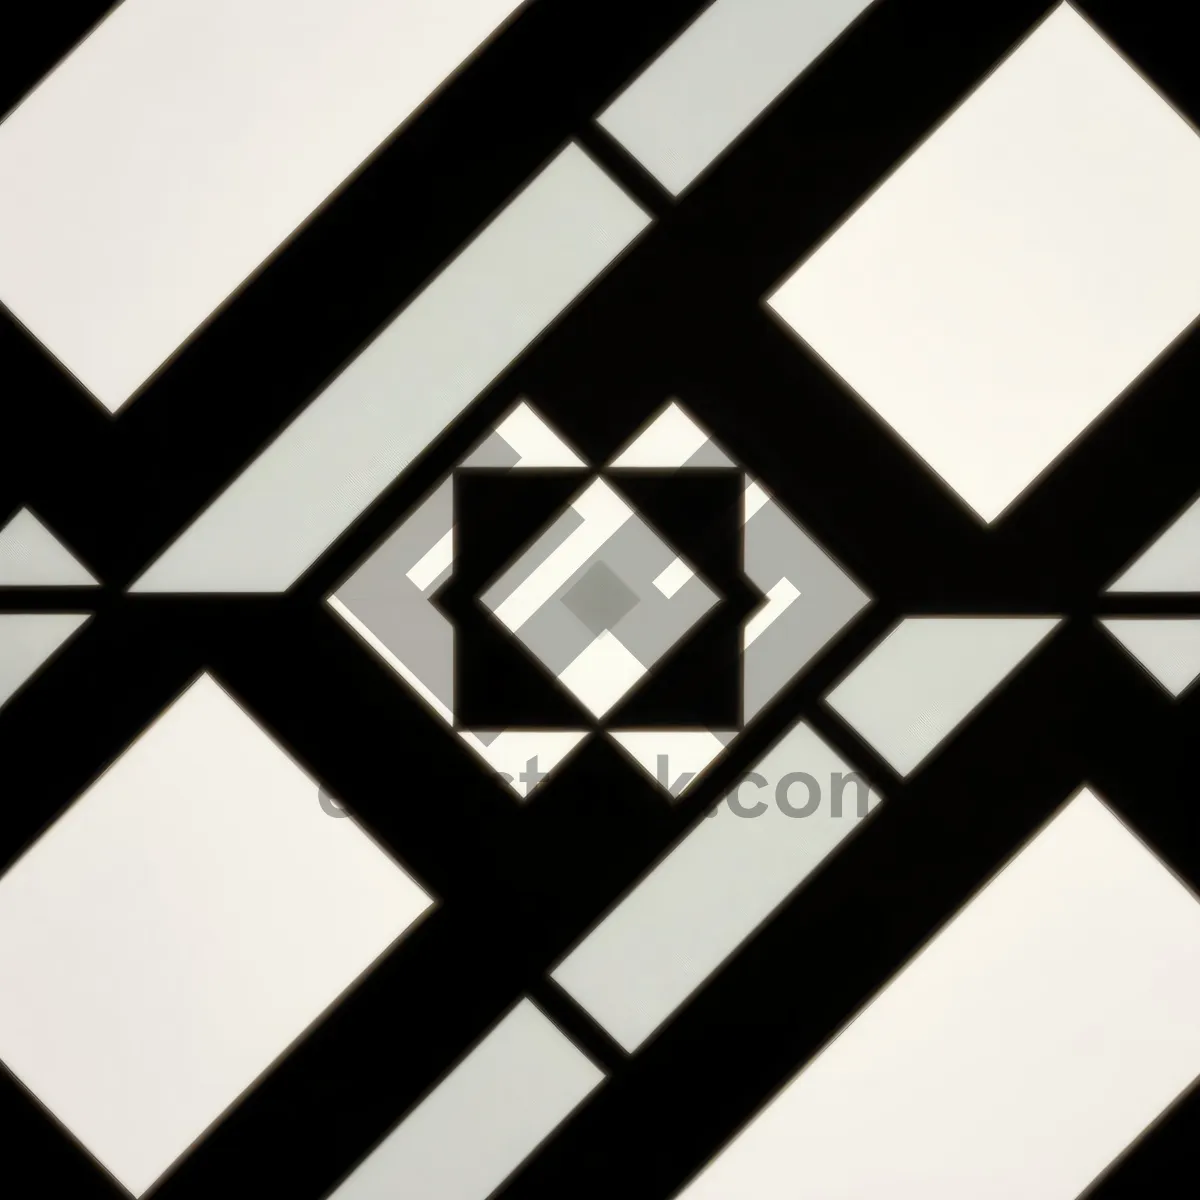 Picture of Geometric Mosaic Grid Art: Black Graphic Checkered Pattern